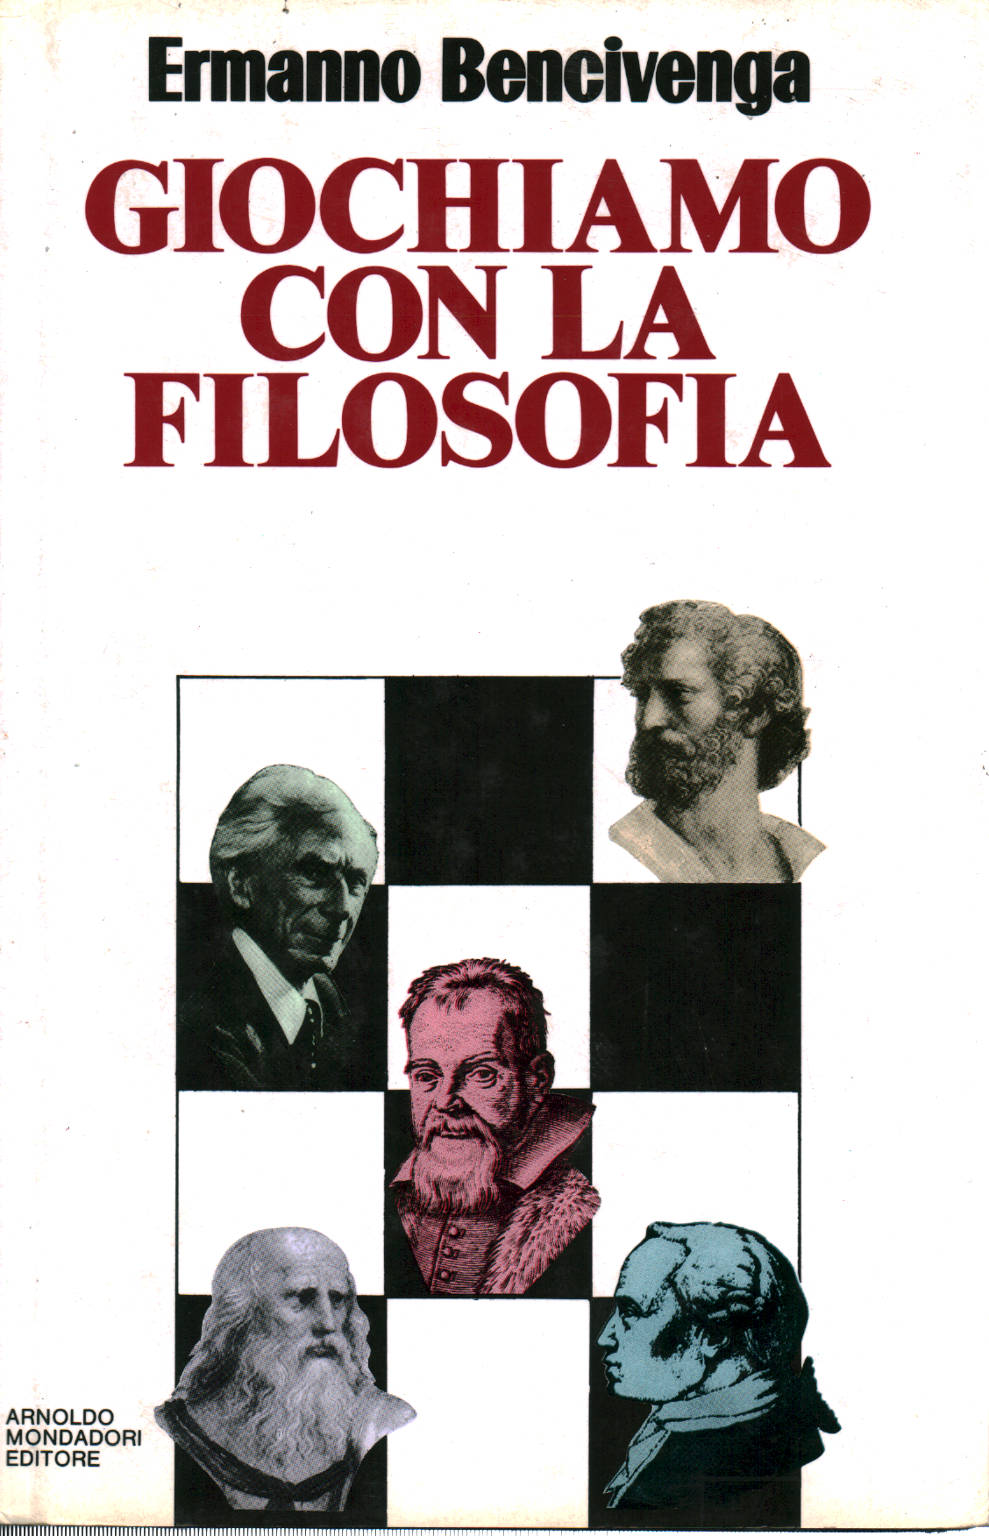 Let's play with philosophy, Ermanno Bencivenga